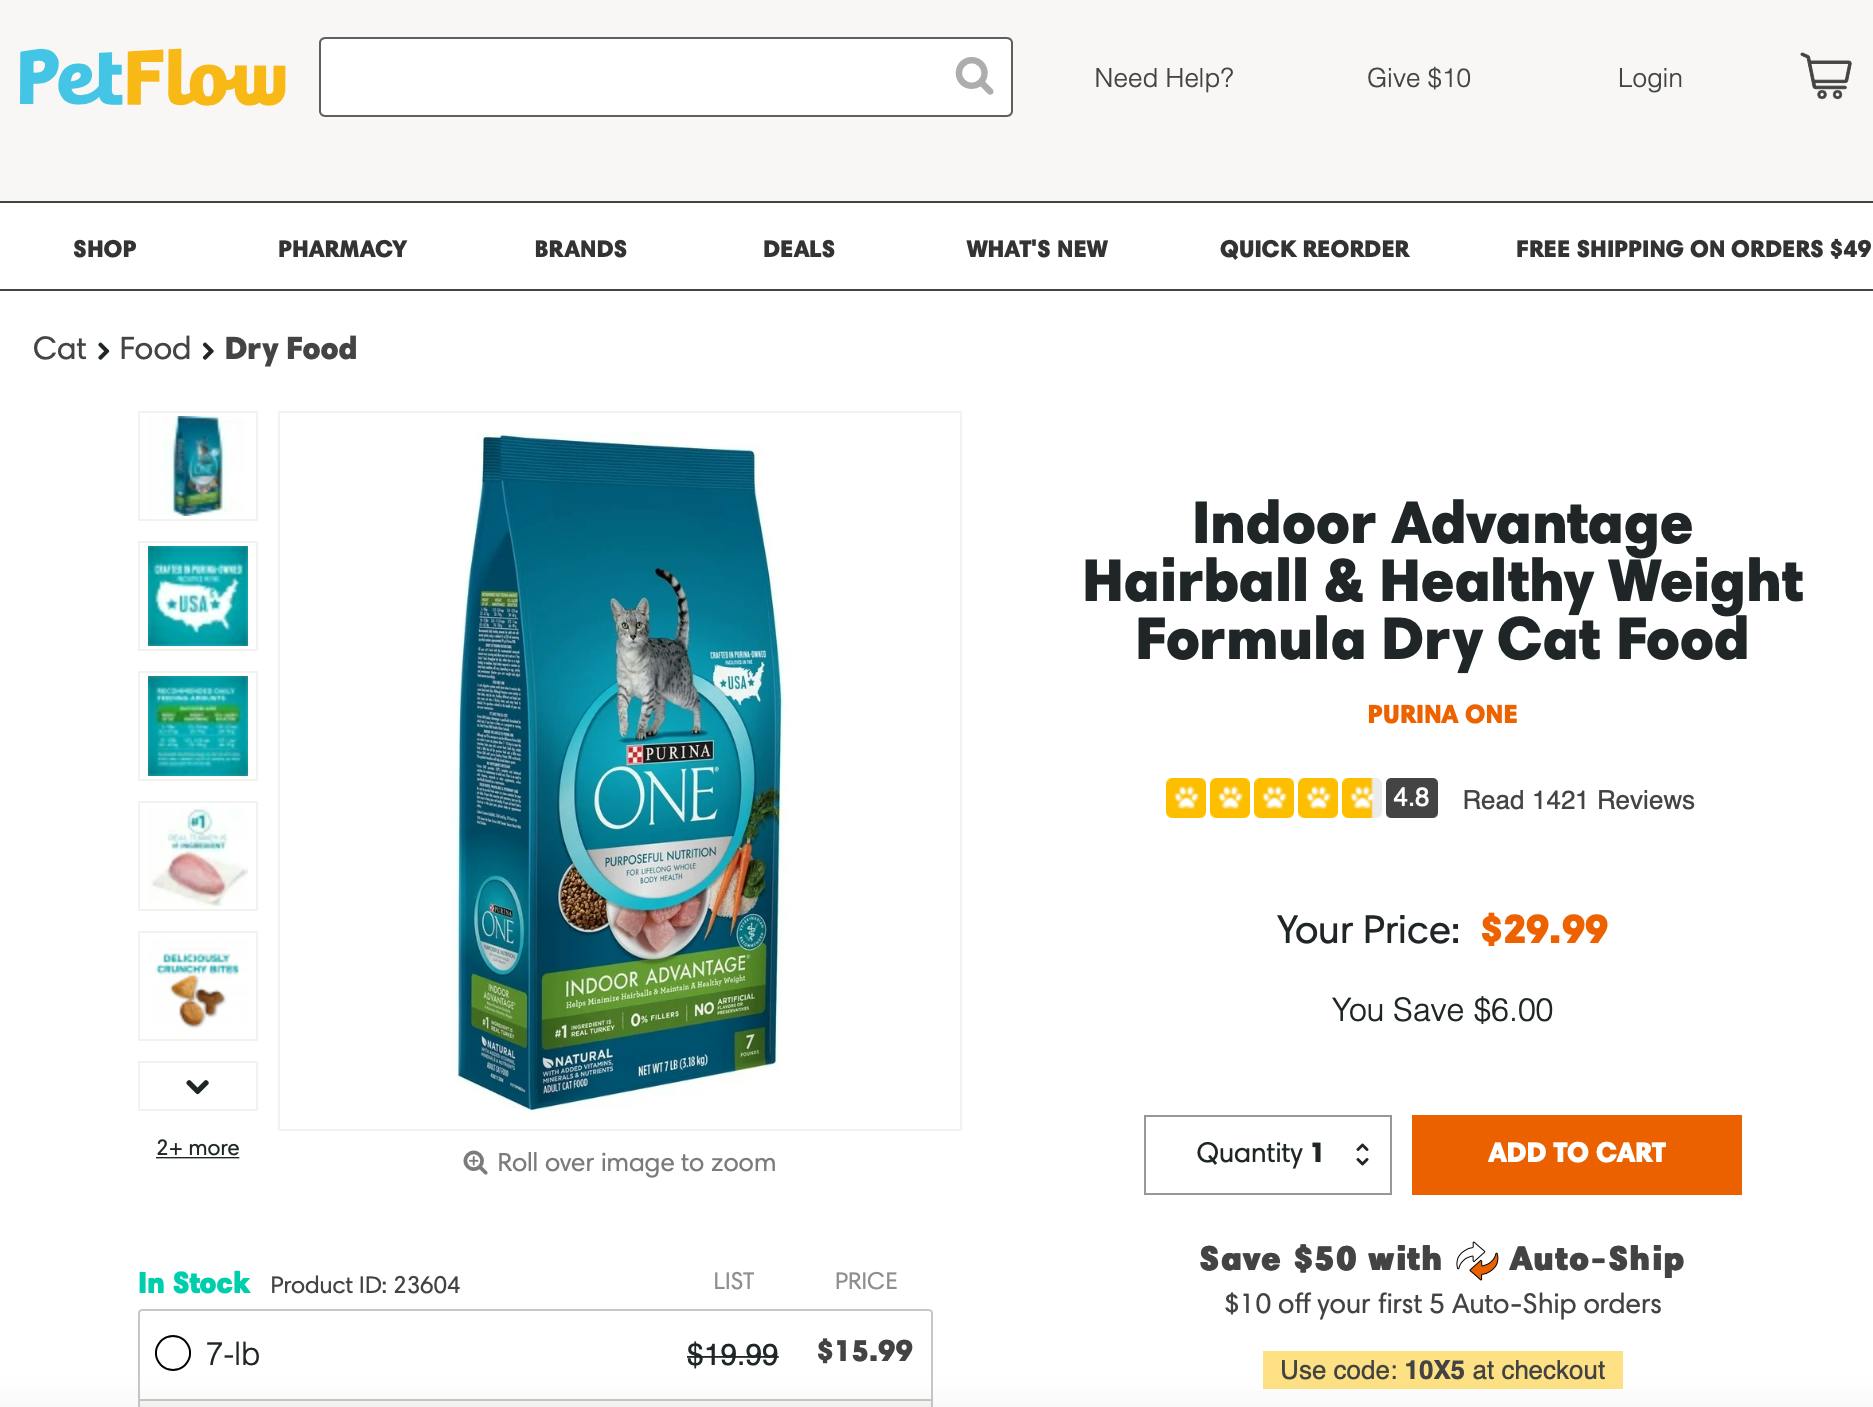 A screenshot from the PetFlow website showing a product page for Purina One Cat food.